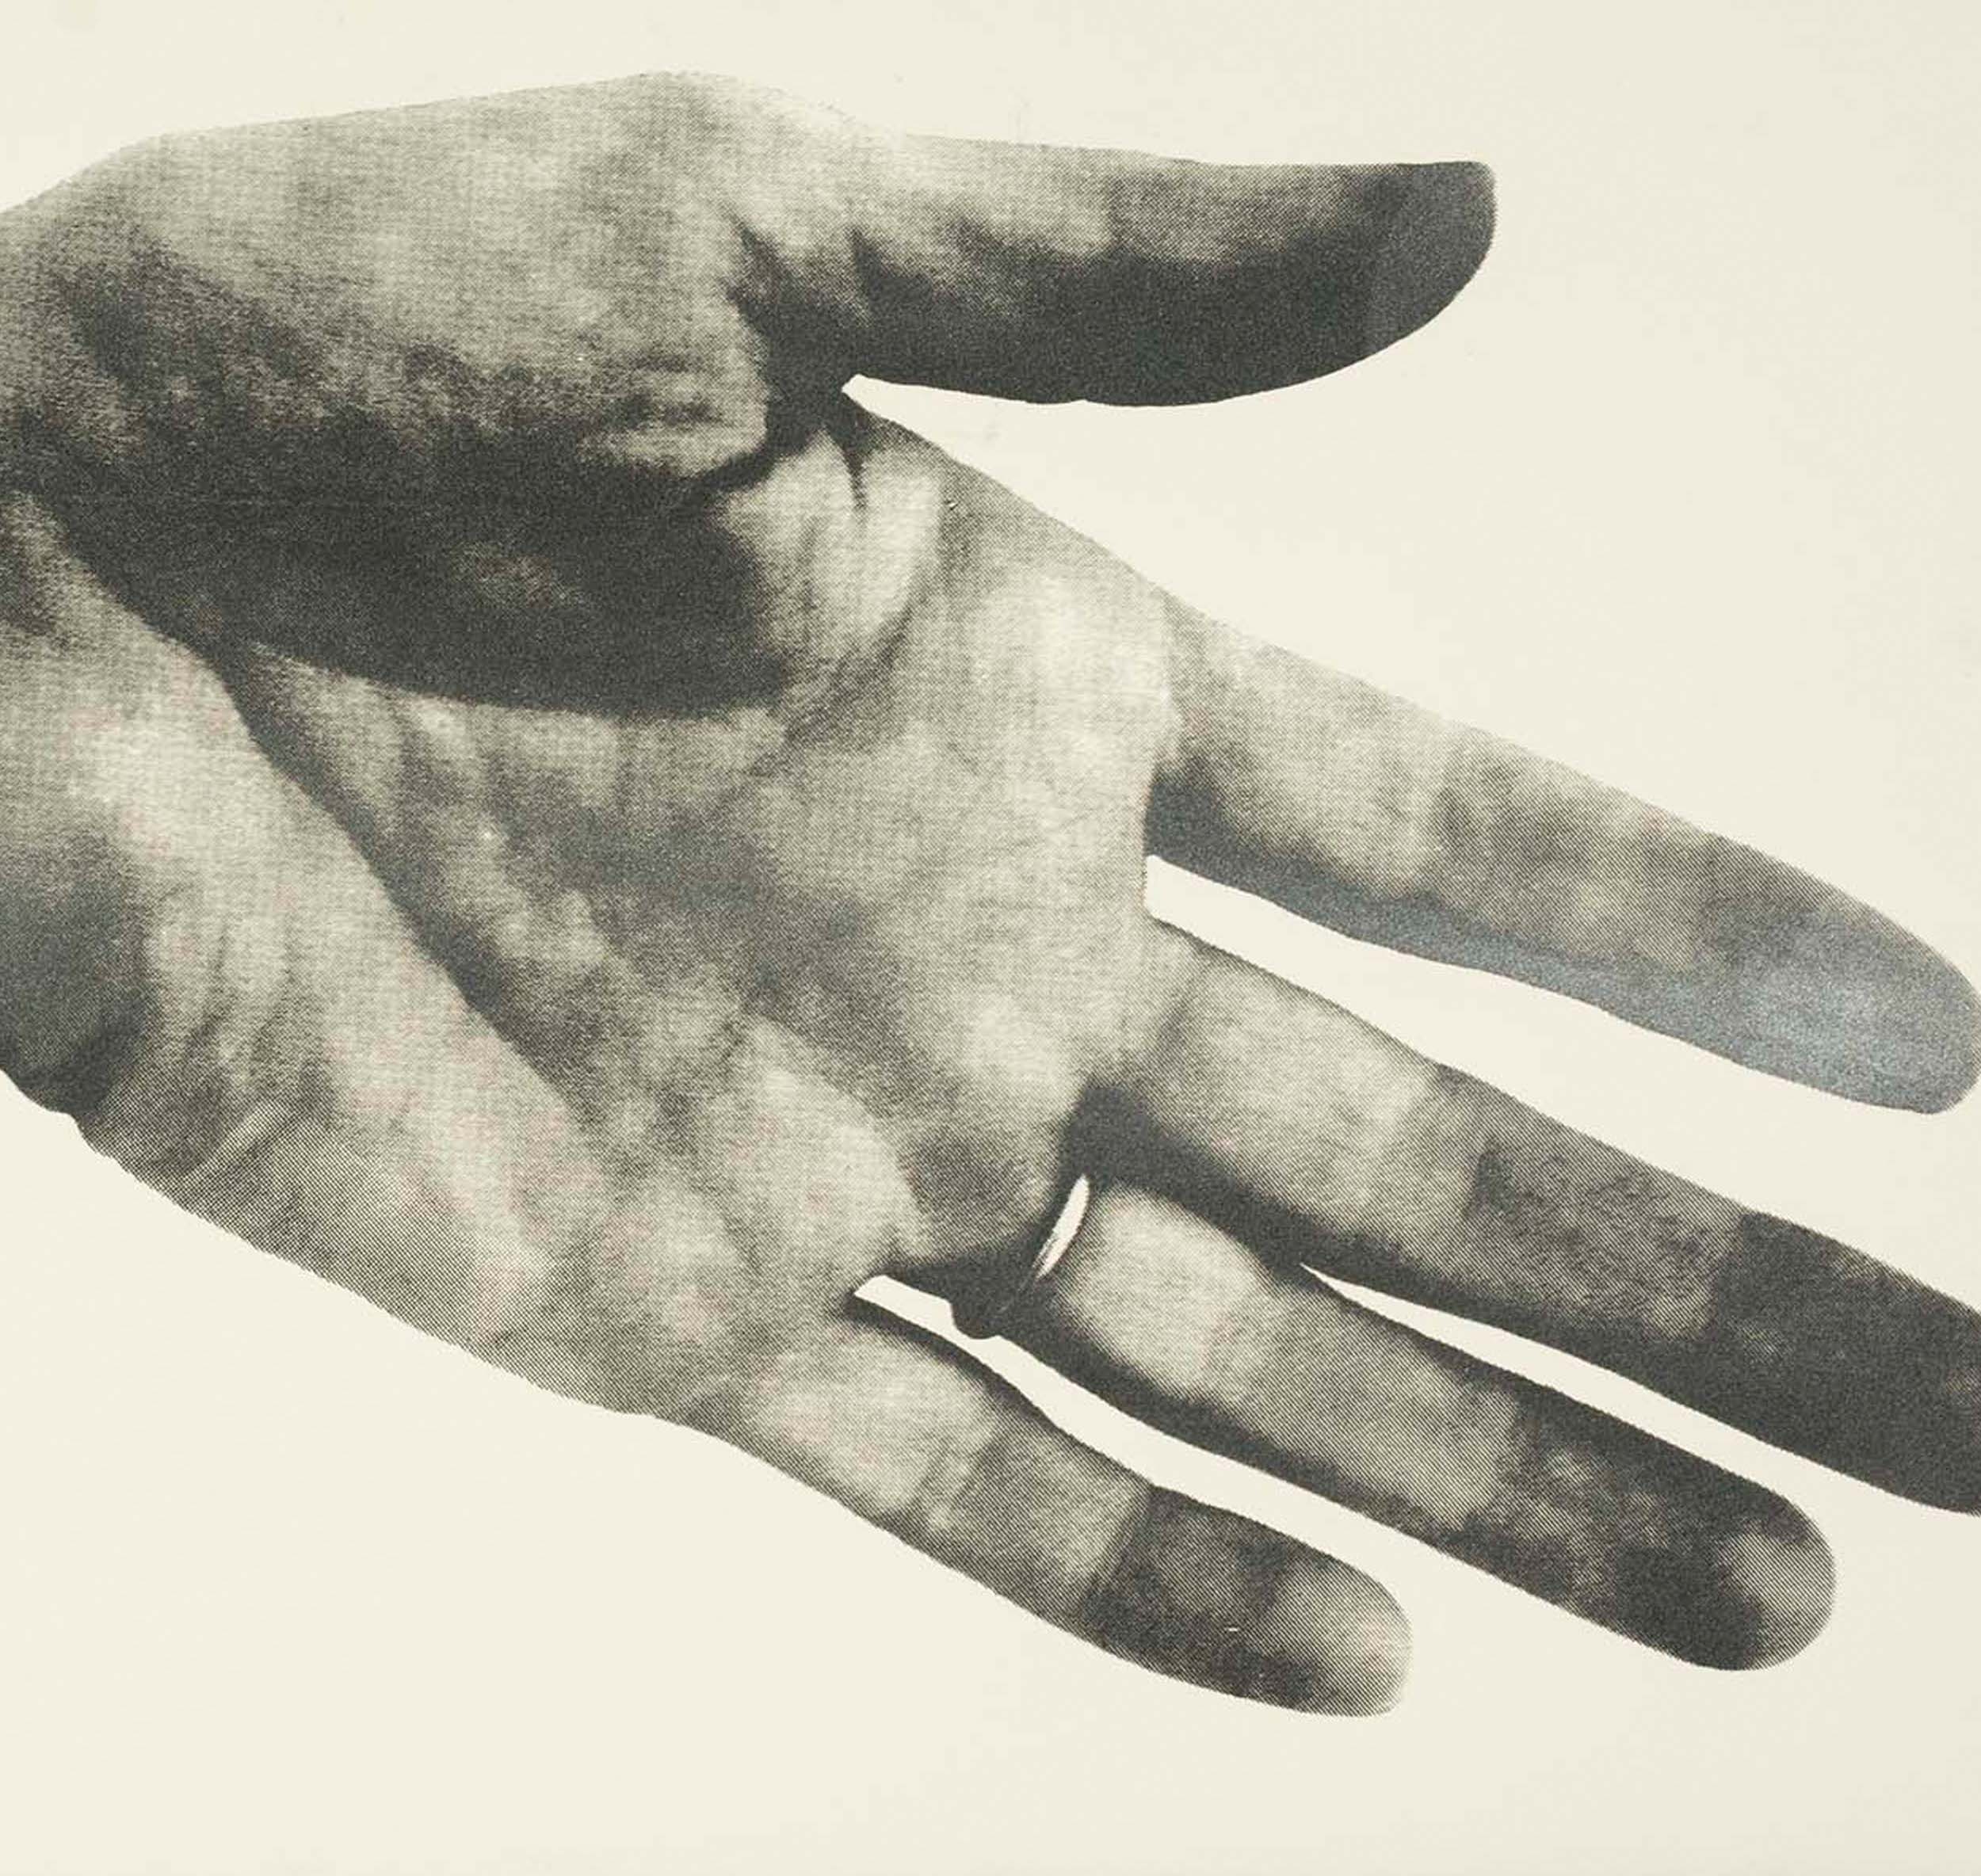 Silkscreen of a human hand, palm-side facing up, and fingers extended.